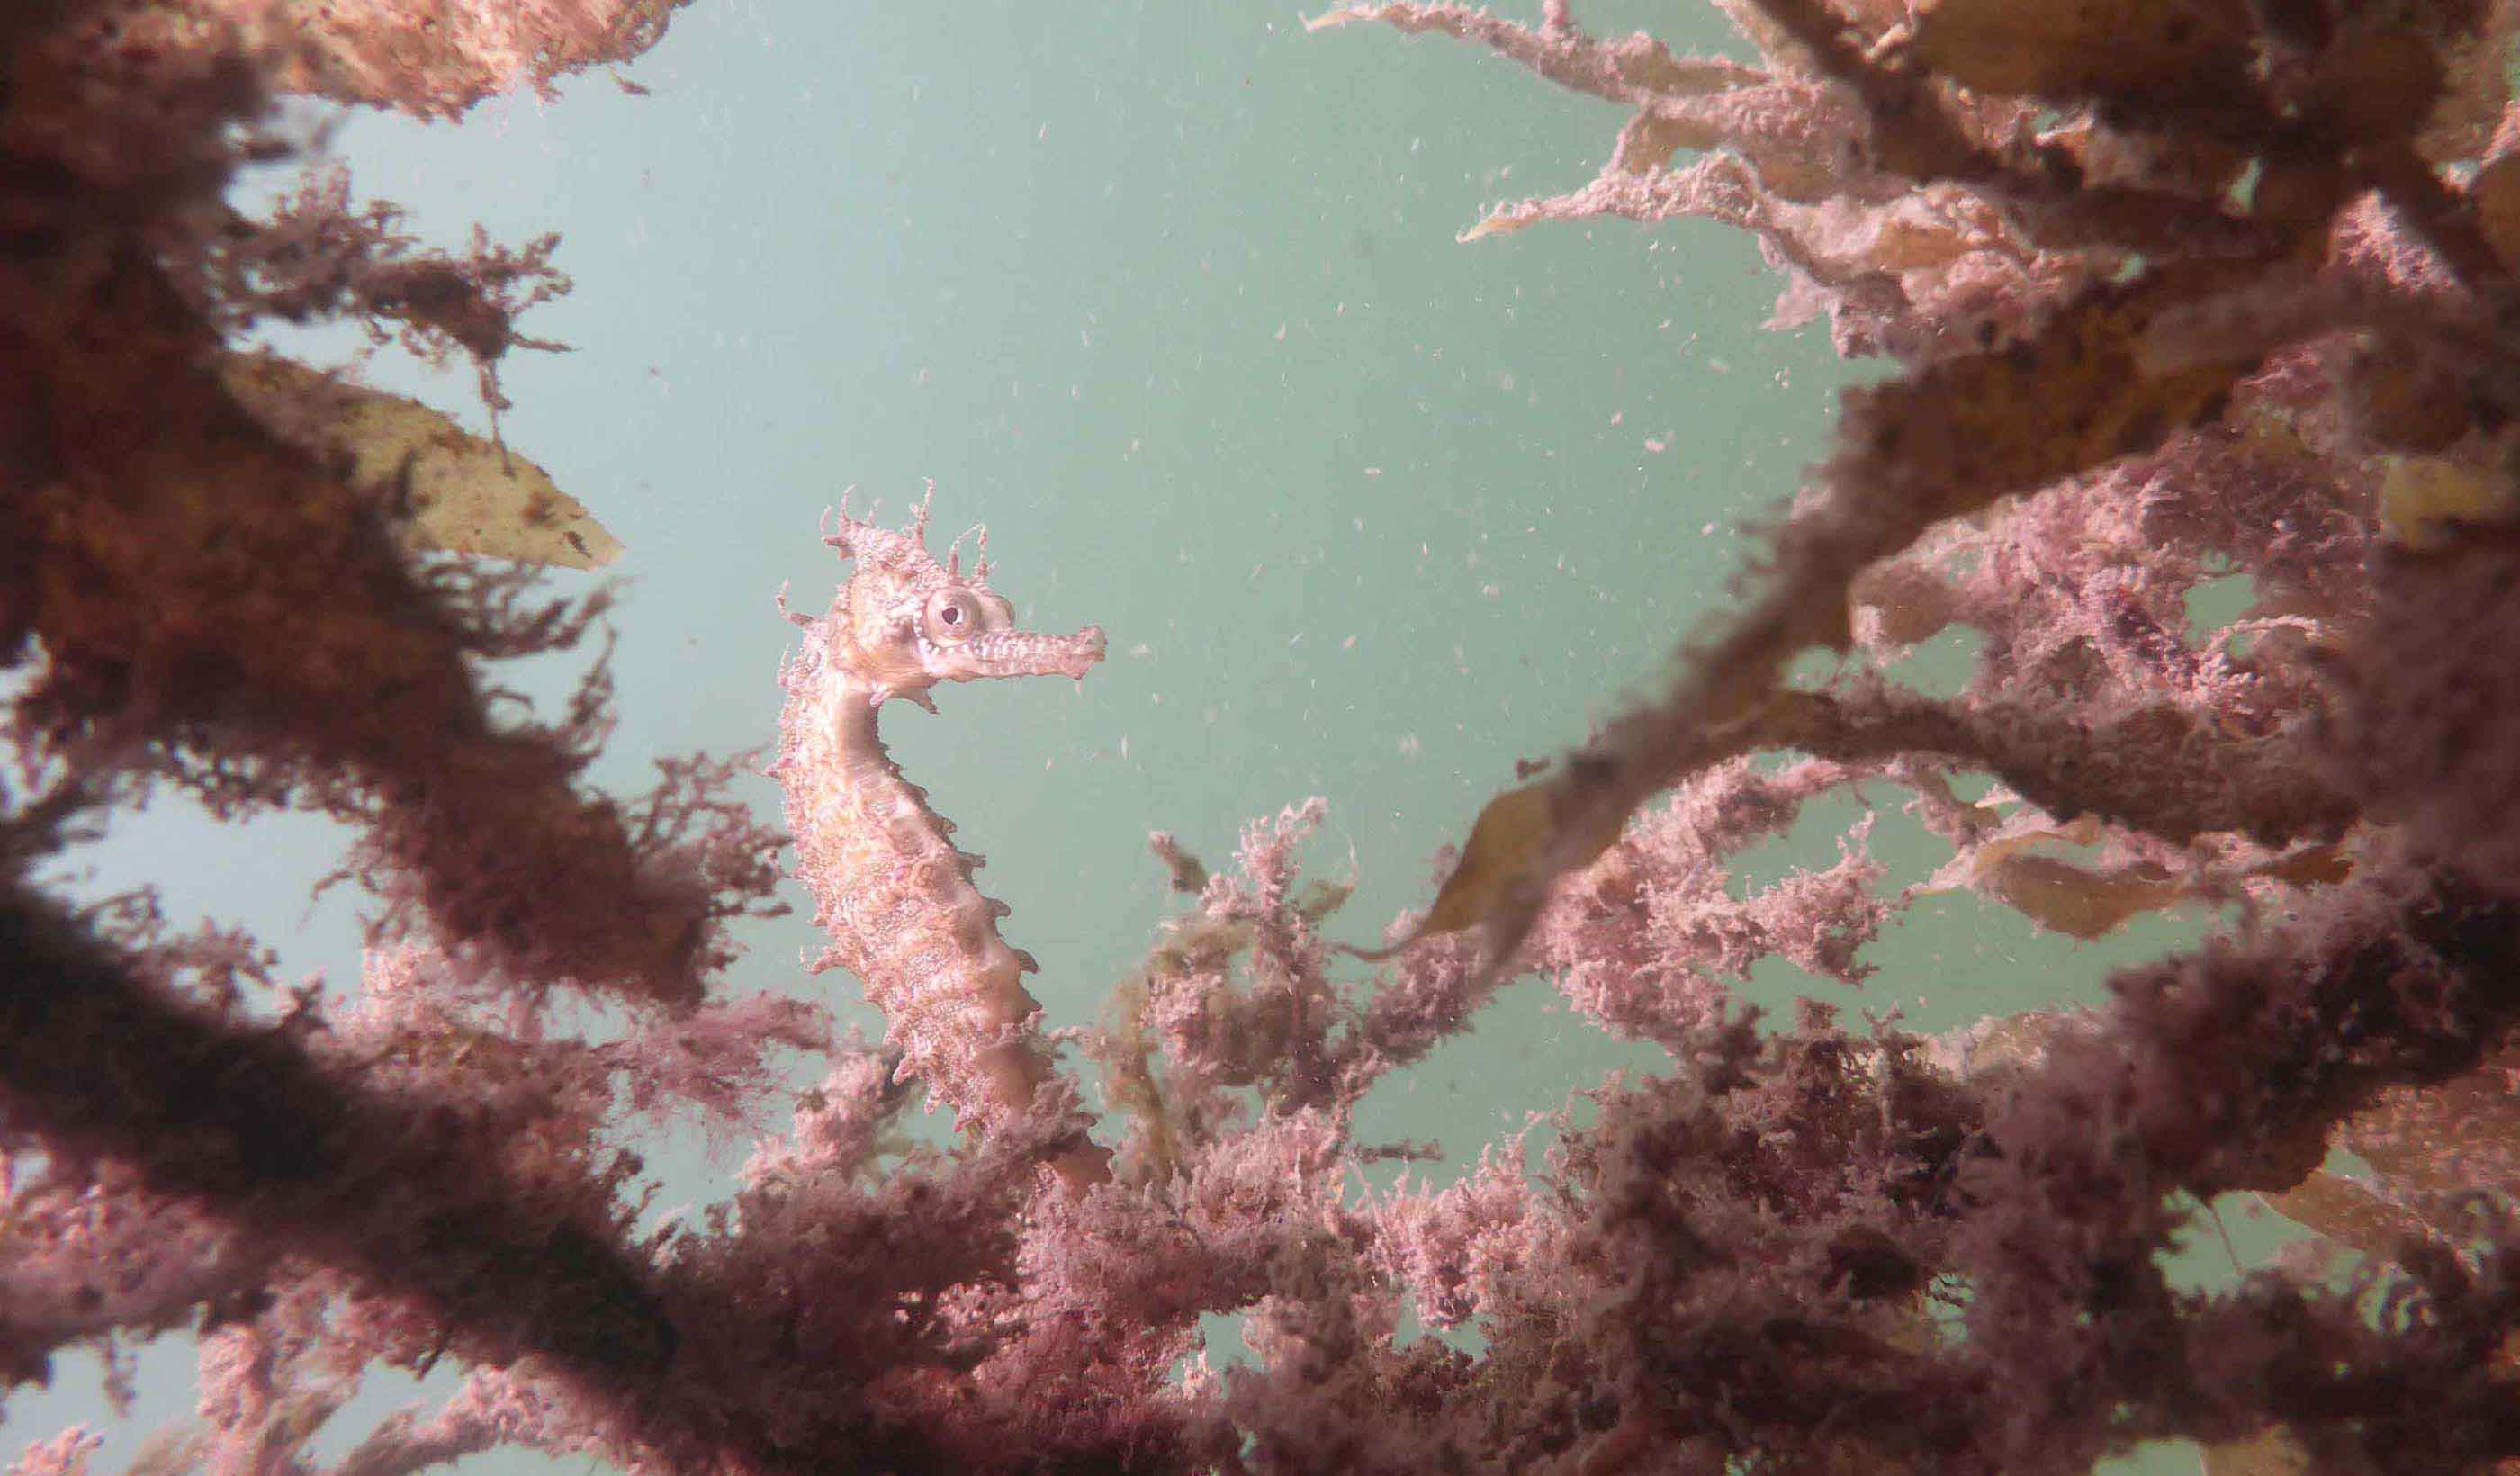 How seahorse hotels protect endangered species in Australia